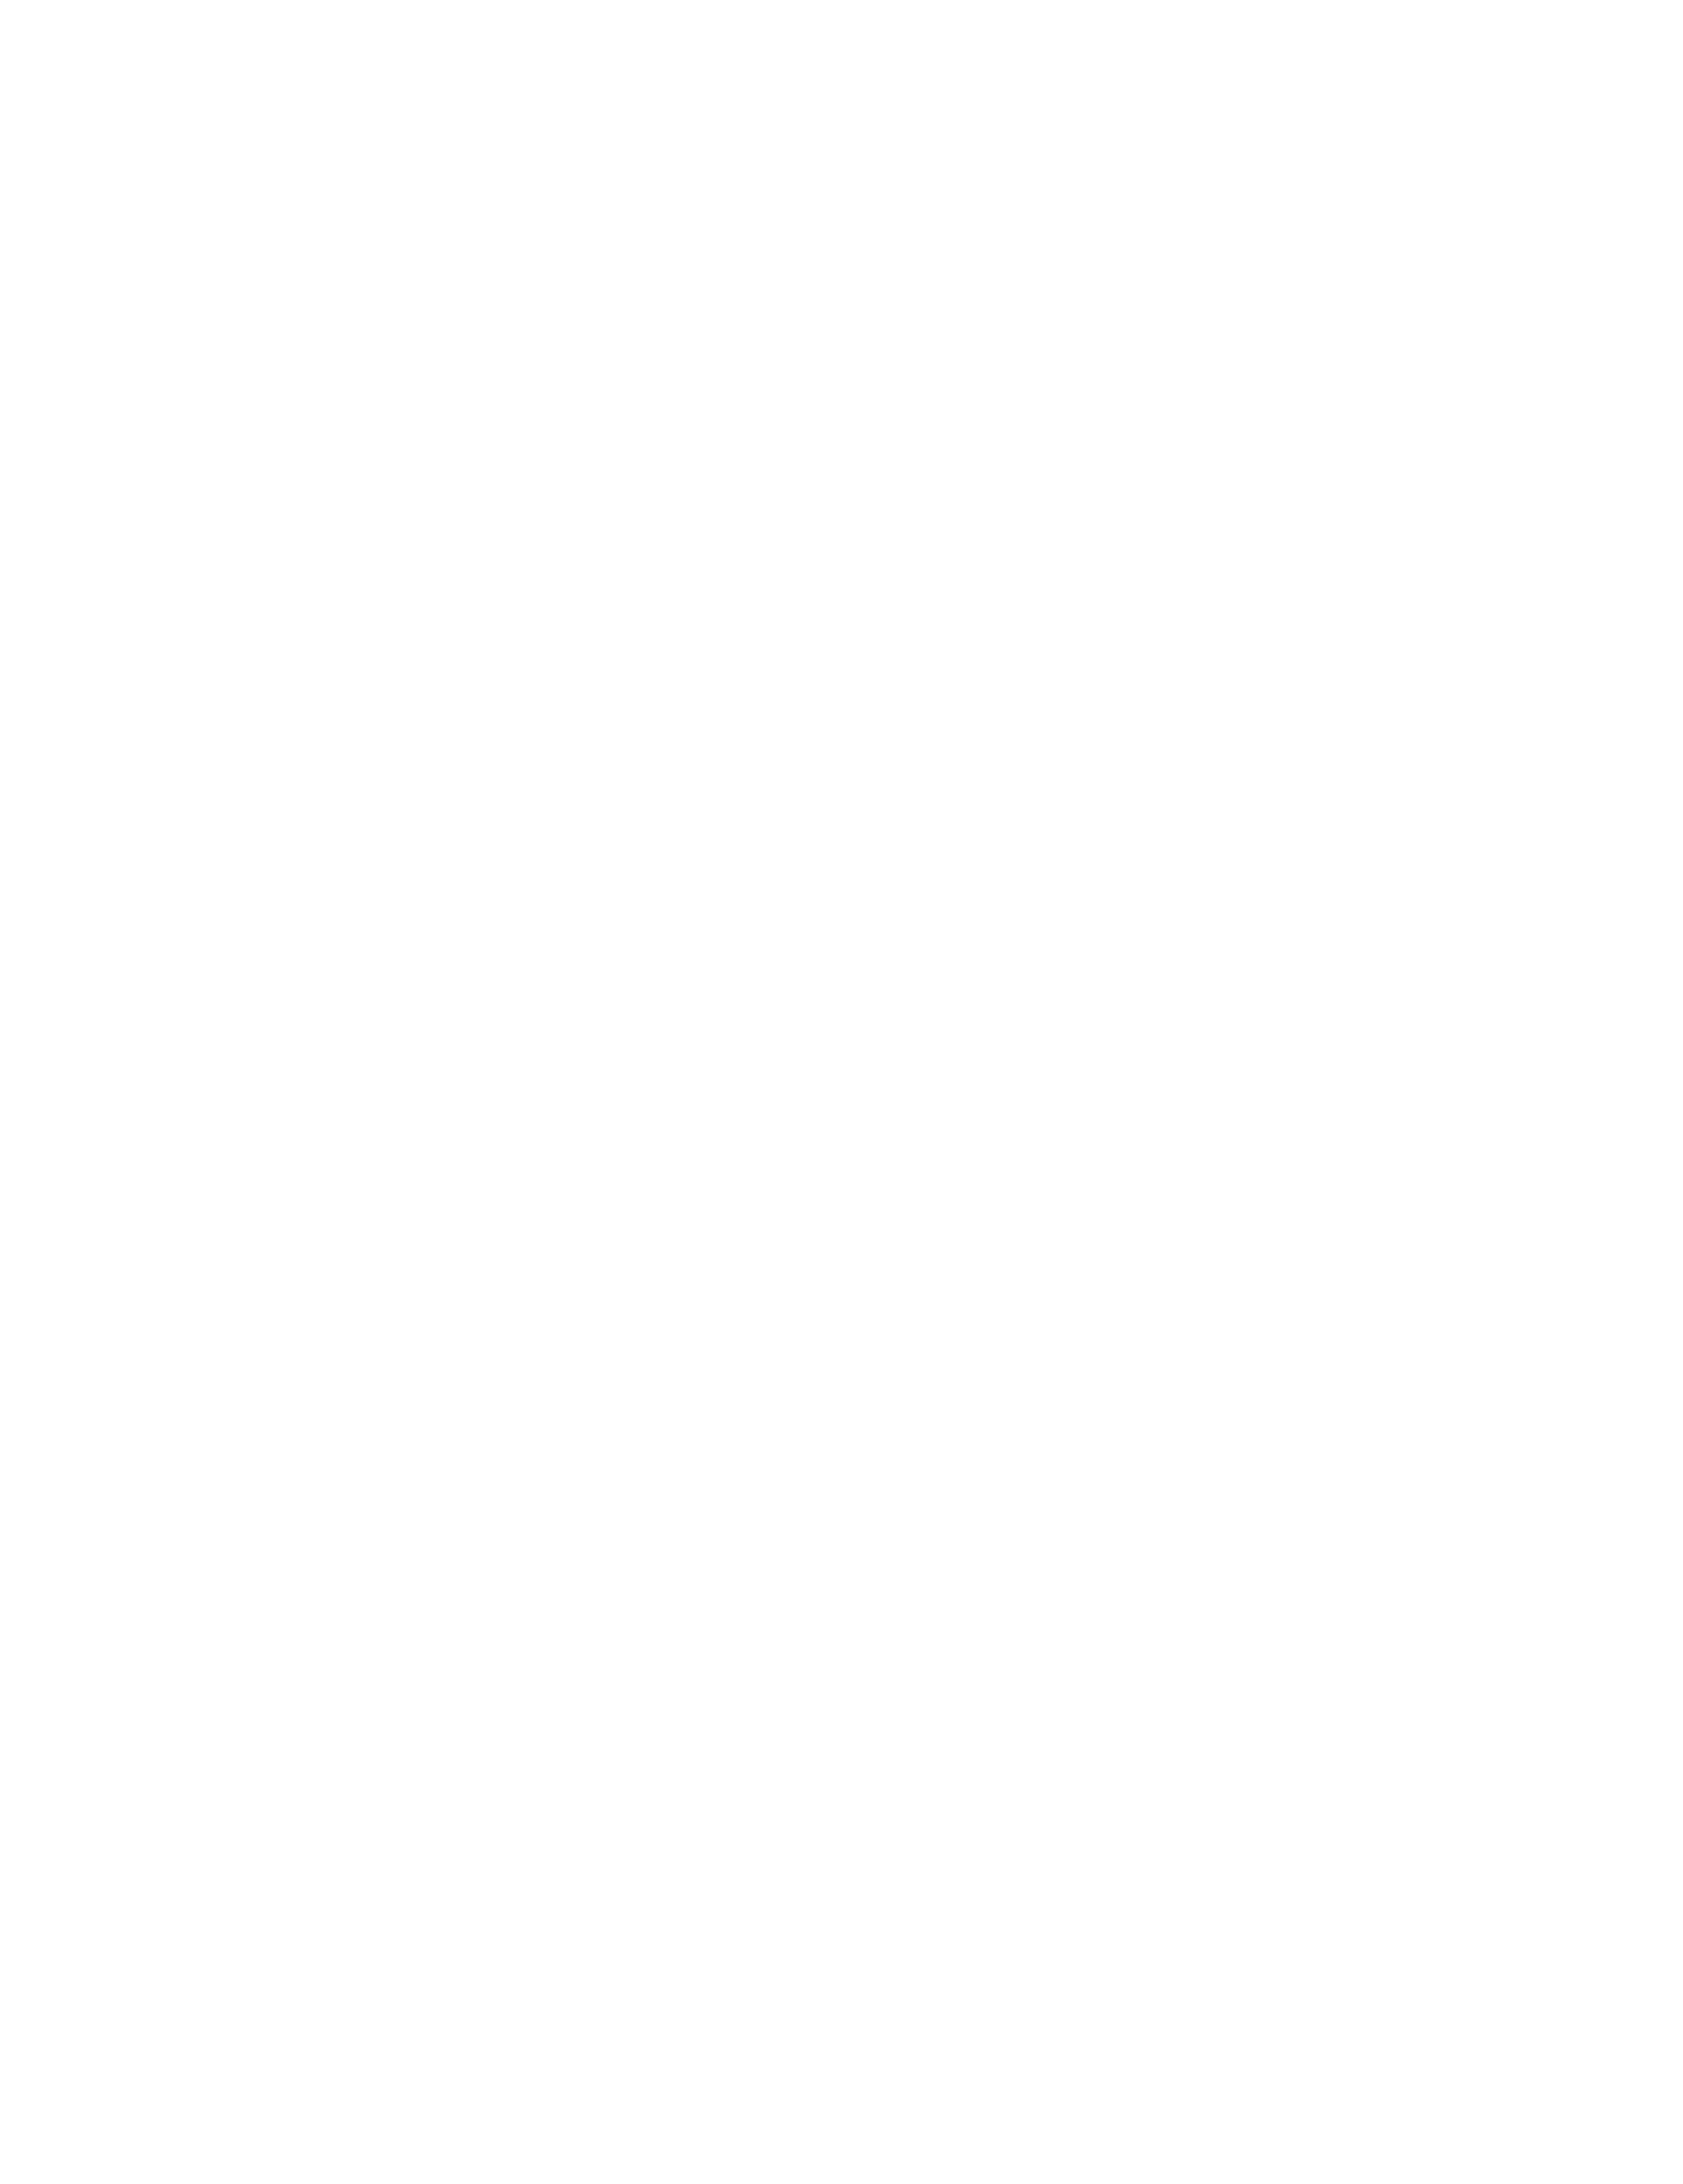 Heap brand logo white with transparent background